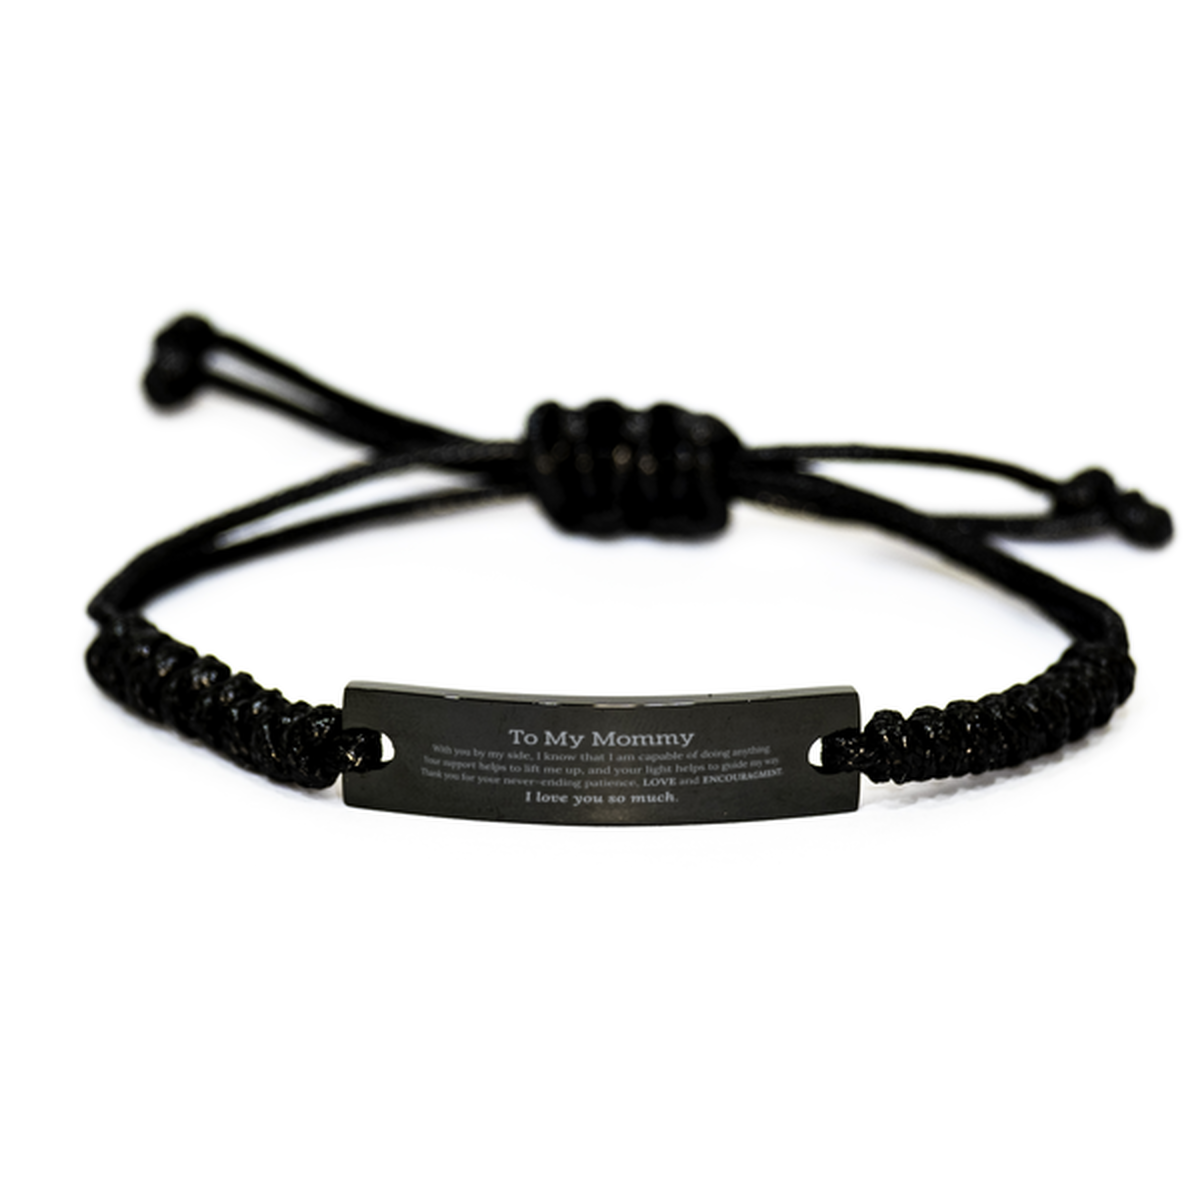 Appreciation Mommy Black Rope Bracelet Gifts, To My Mommy Birthday Christmas Wedding Keepsake Gifts for Mommy With you by my side, I know that I am capable of doing anything. I love you so much